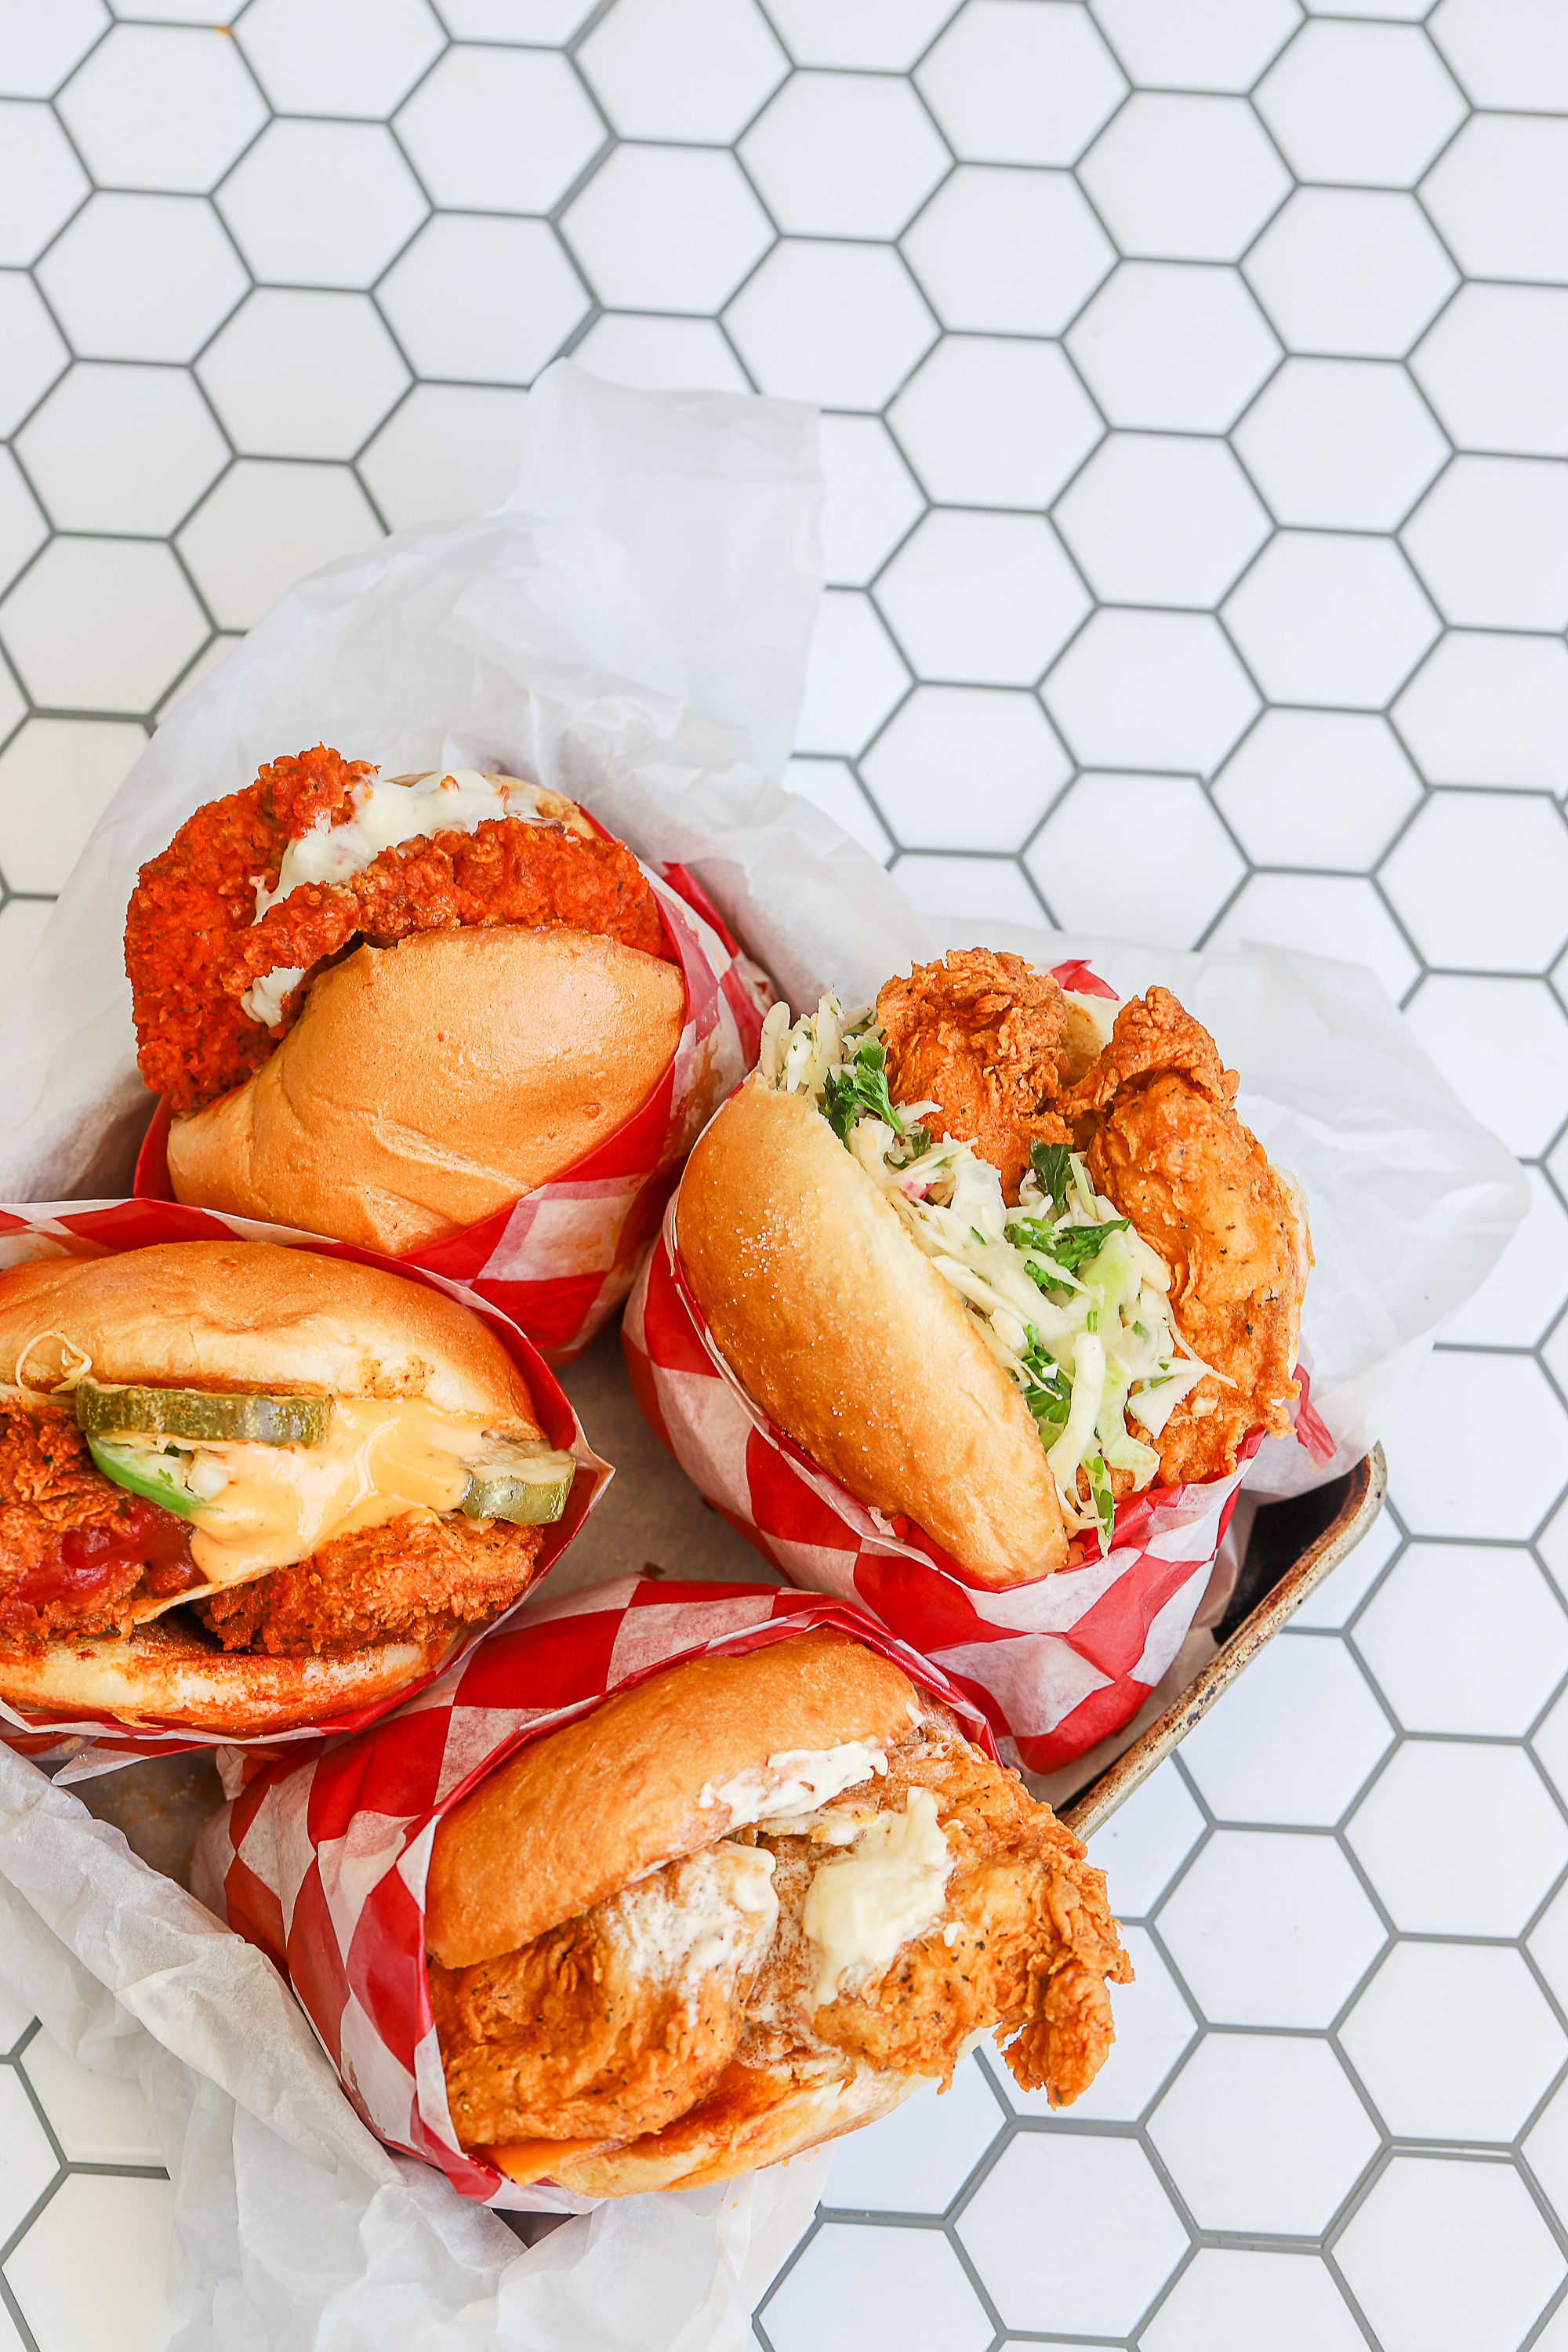 The restaurant offers a variety of chicken sandwiches, including a Nashville hot chicken option. Photo by Roaming Rooster.